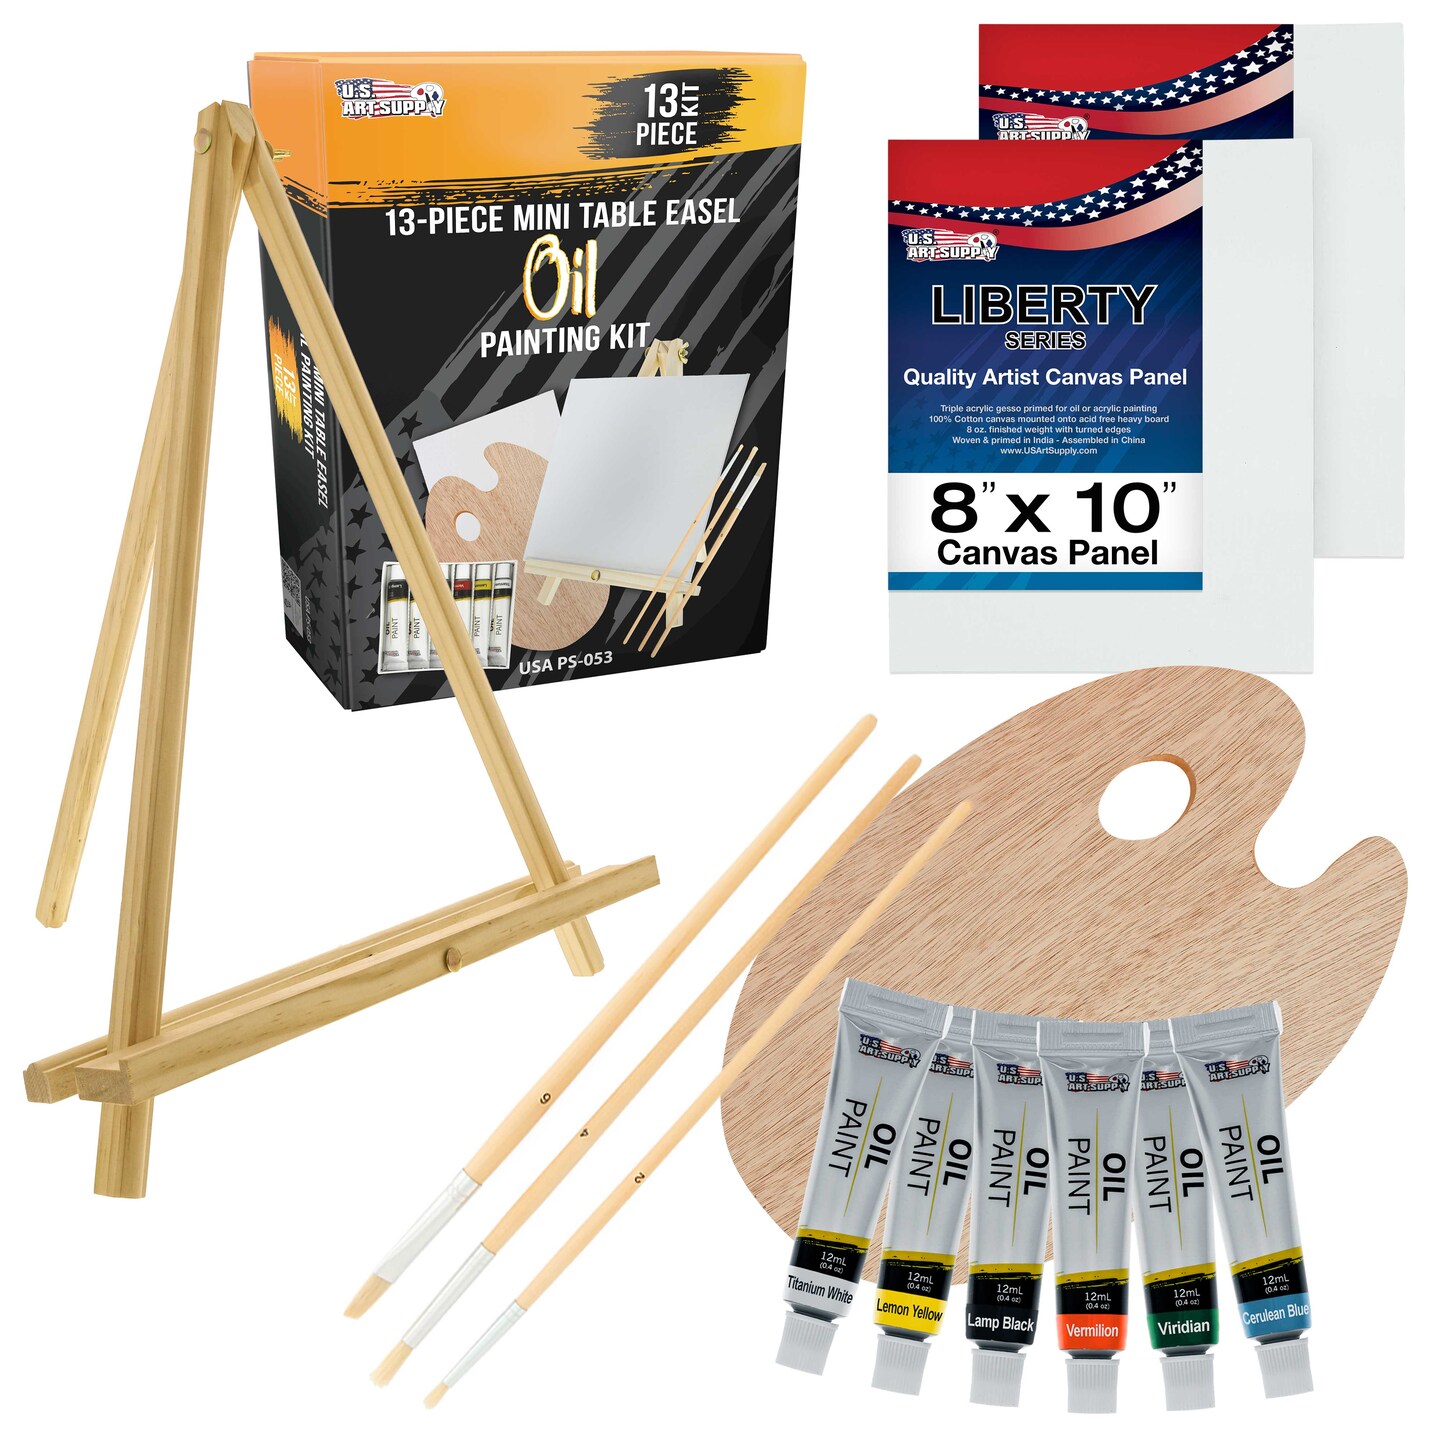 Oil Painting Sets For All Levels Artists-MEEDN Art Supplies